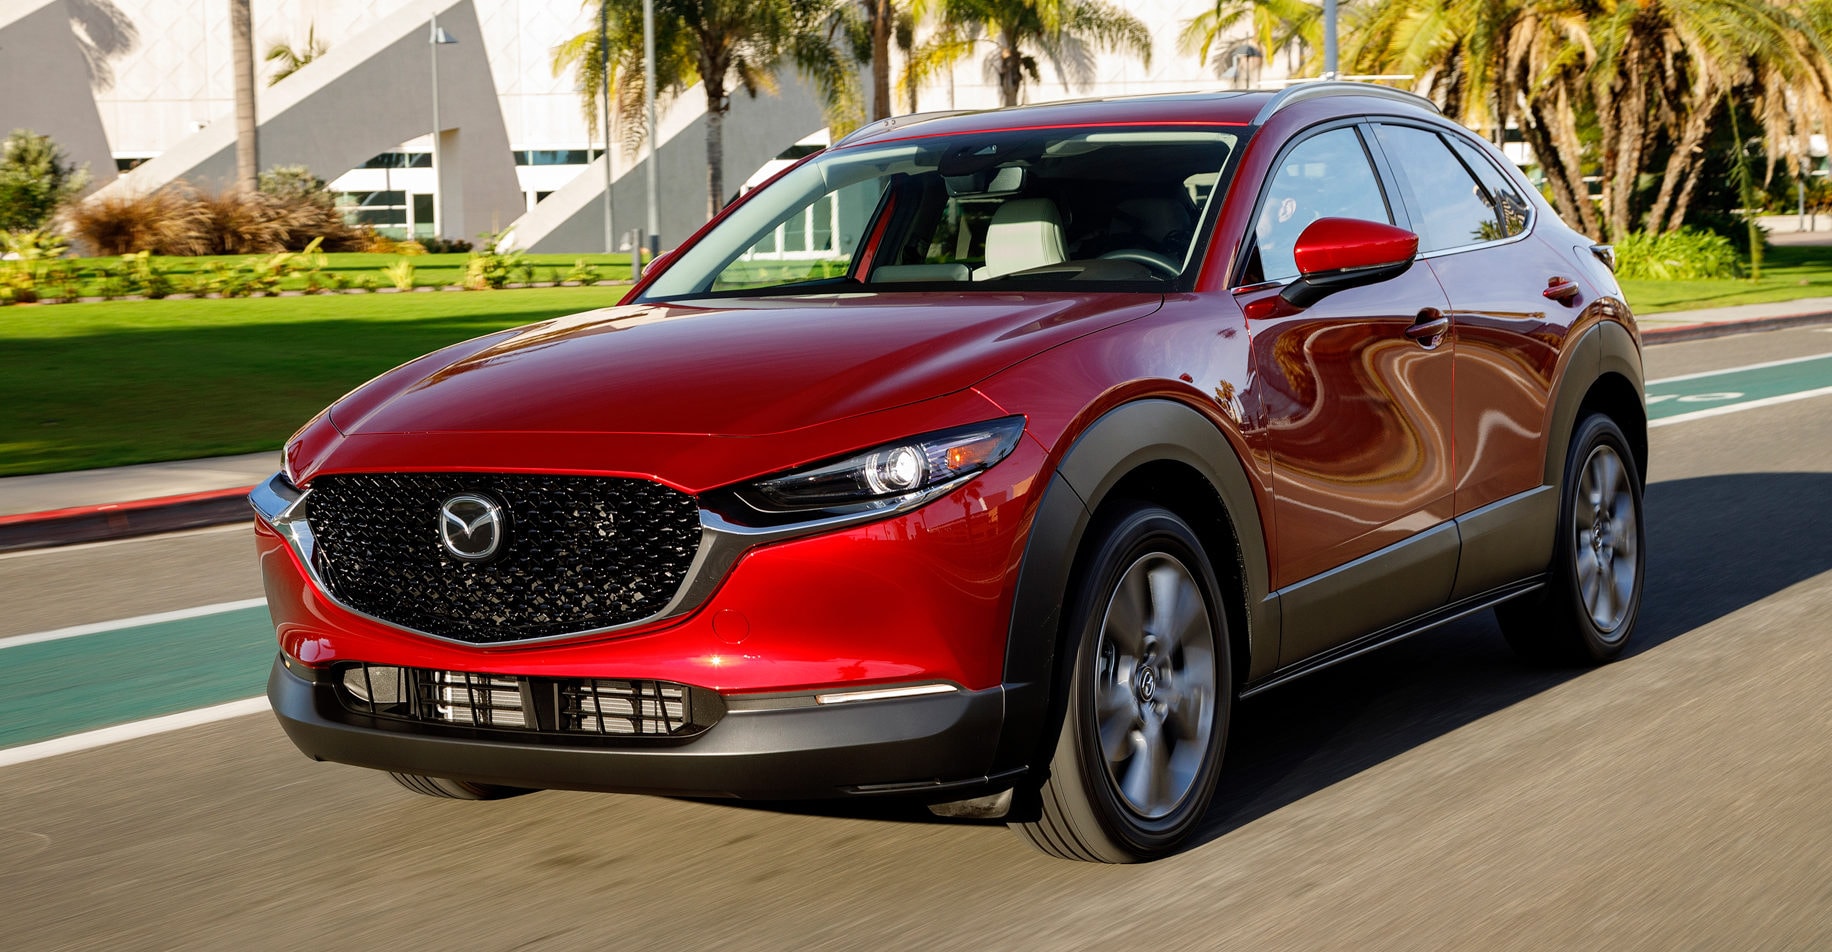 With 2021 CX-30 Turbo, Mazda Continues Turbo'ing All Of the Things